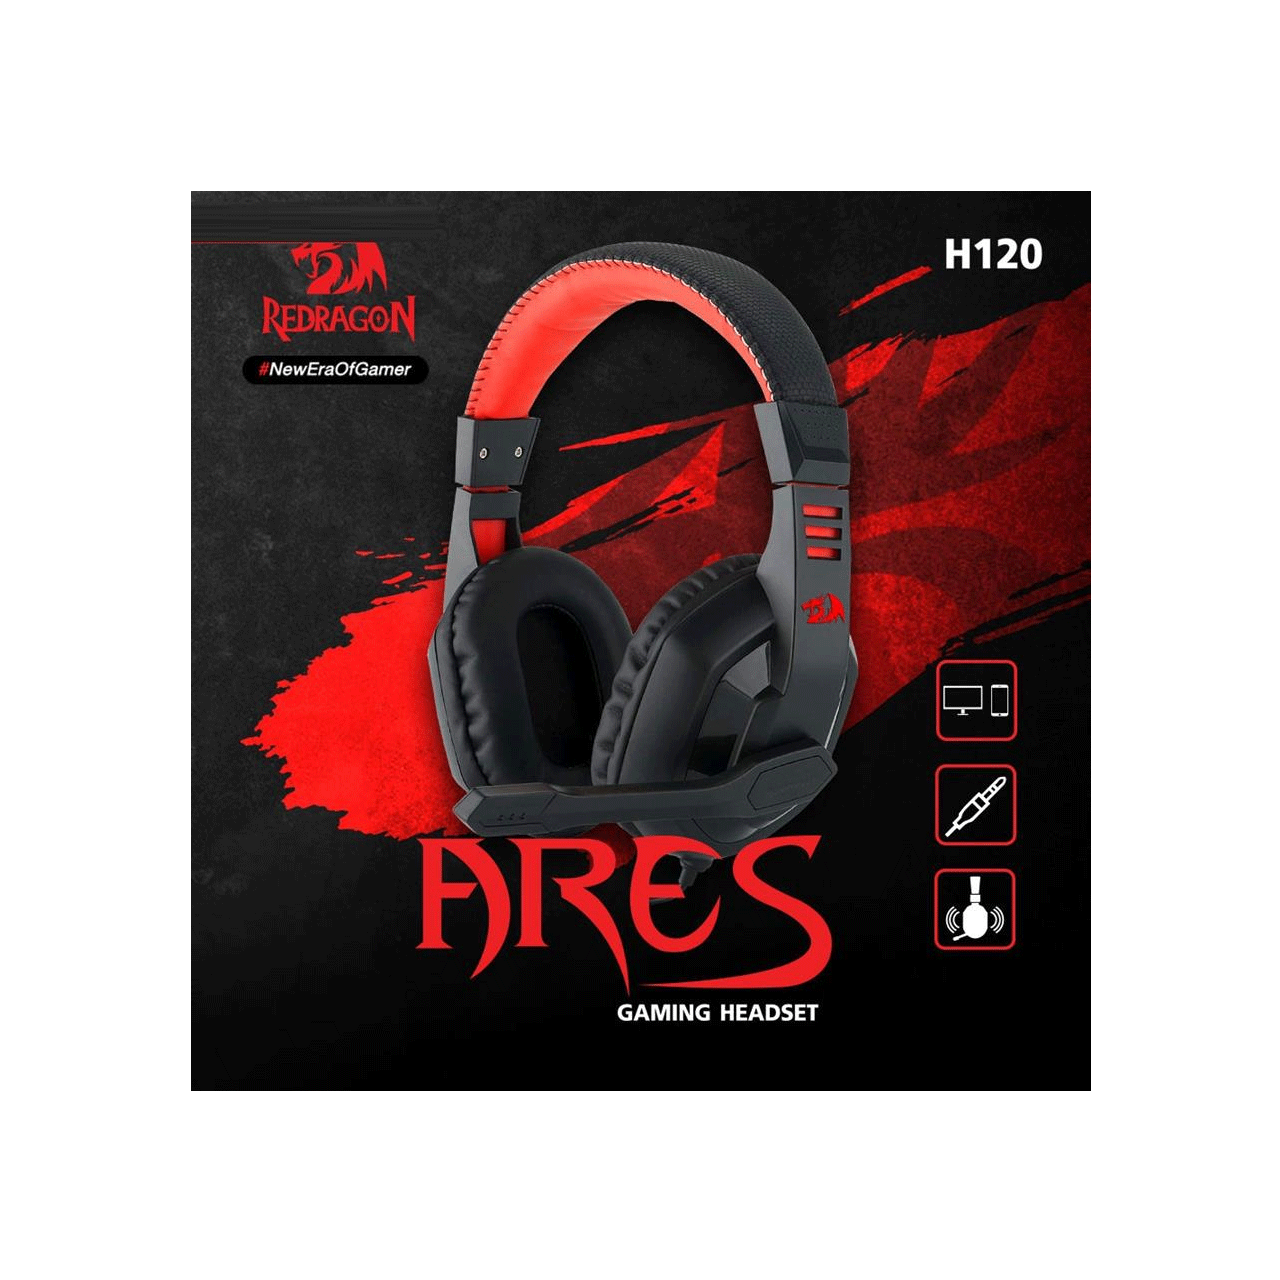 Redragon-2Ares-H120-headset - Copy